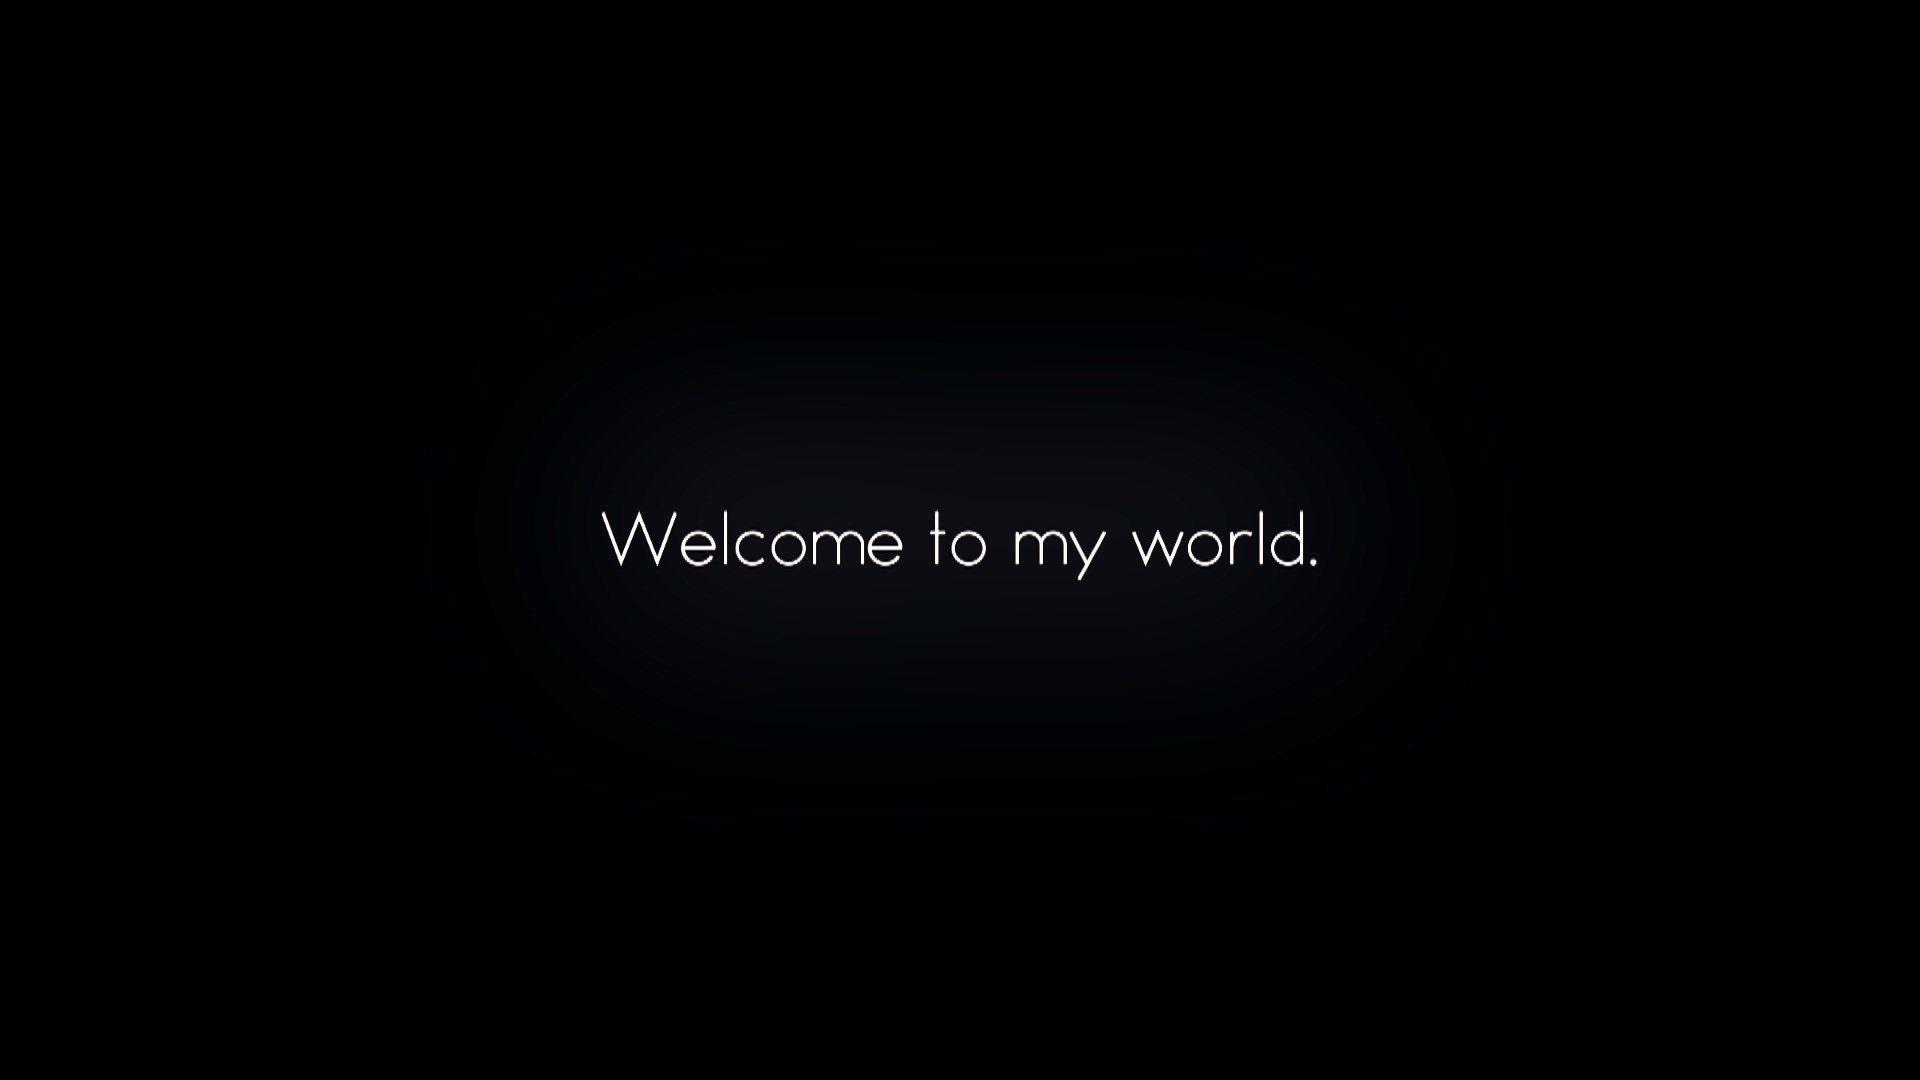 welcome to my world wallpaper x 1080